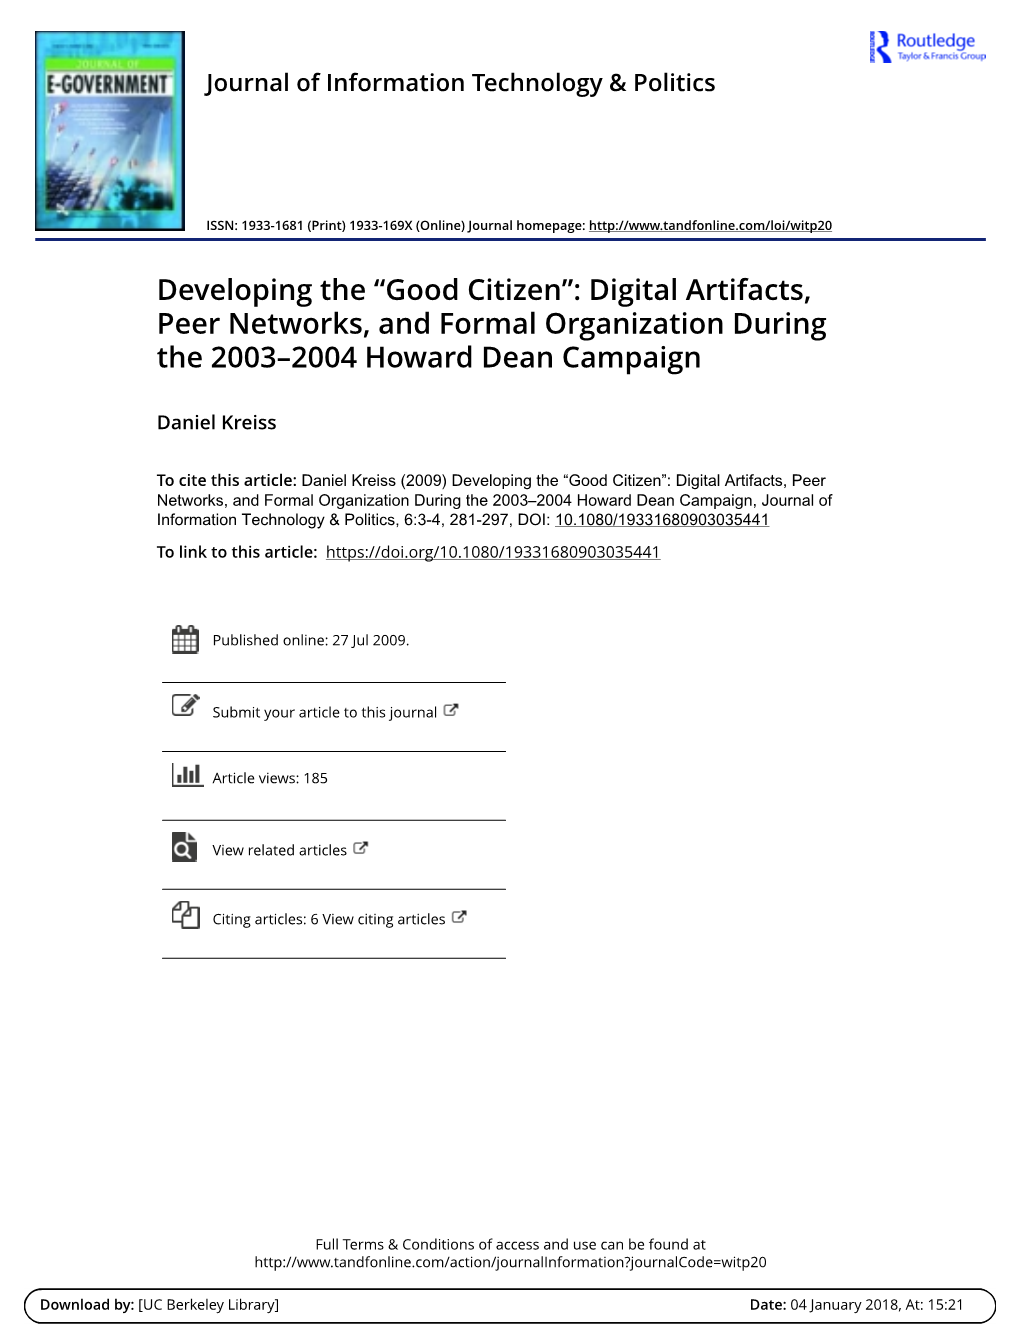 Good Citizen”: Digital Artifacts, Peer Networks, and Formal Organization During the 2003–2004 Howard Dean Campaign